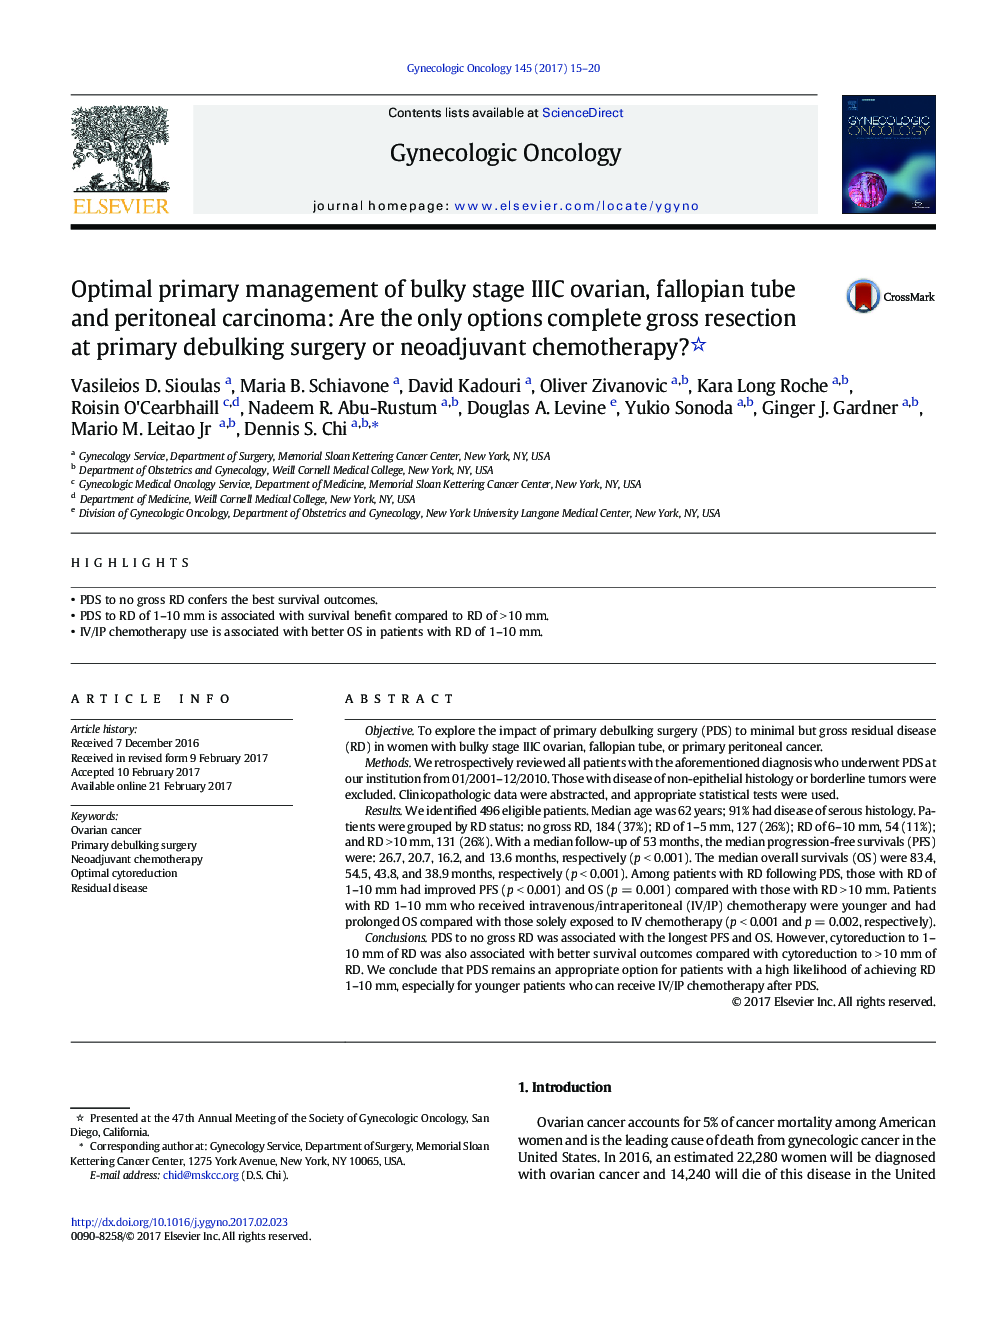 Optimal primary management of bulky stage IIIC ovarian, fallopian tube and peritoneal carcinoma: Are the only options complete gross resection at primary debulking surgery or neoadjuvant chemotherapy?